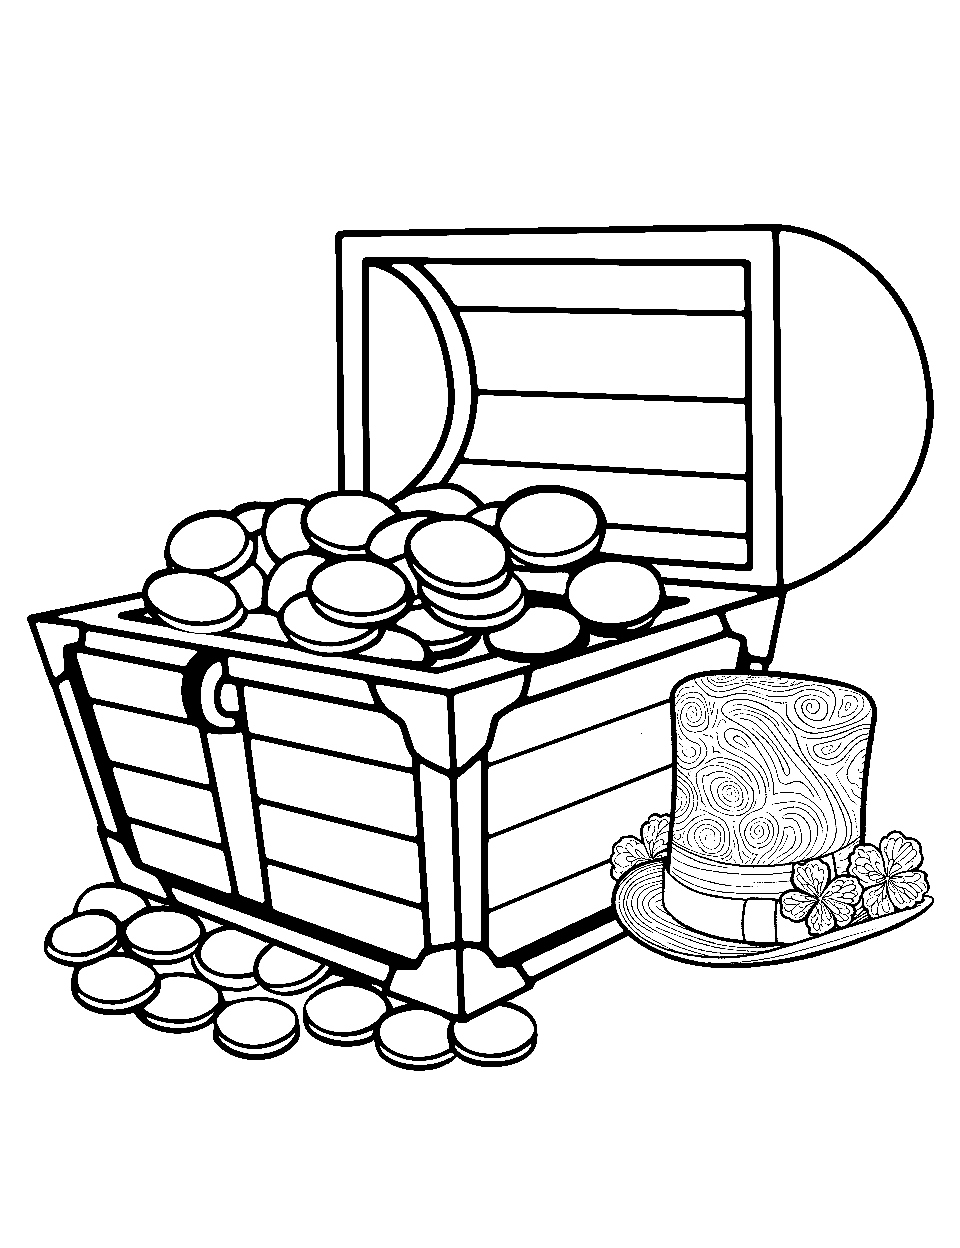 Leprechaun's Treasure Chest Coloring Page - An old treasure chest filled with gold coins.